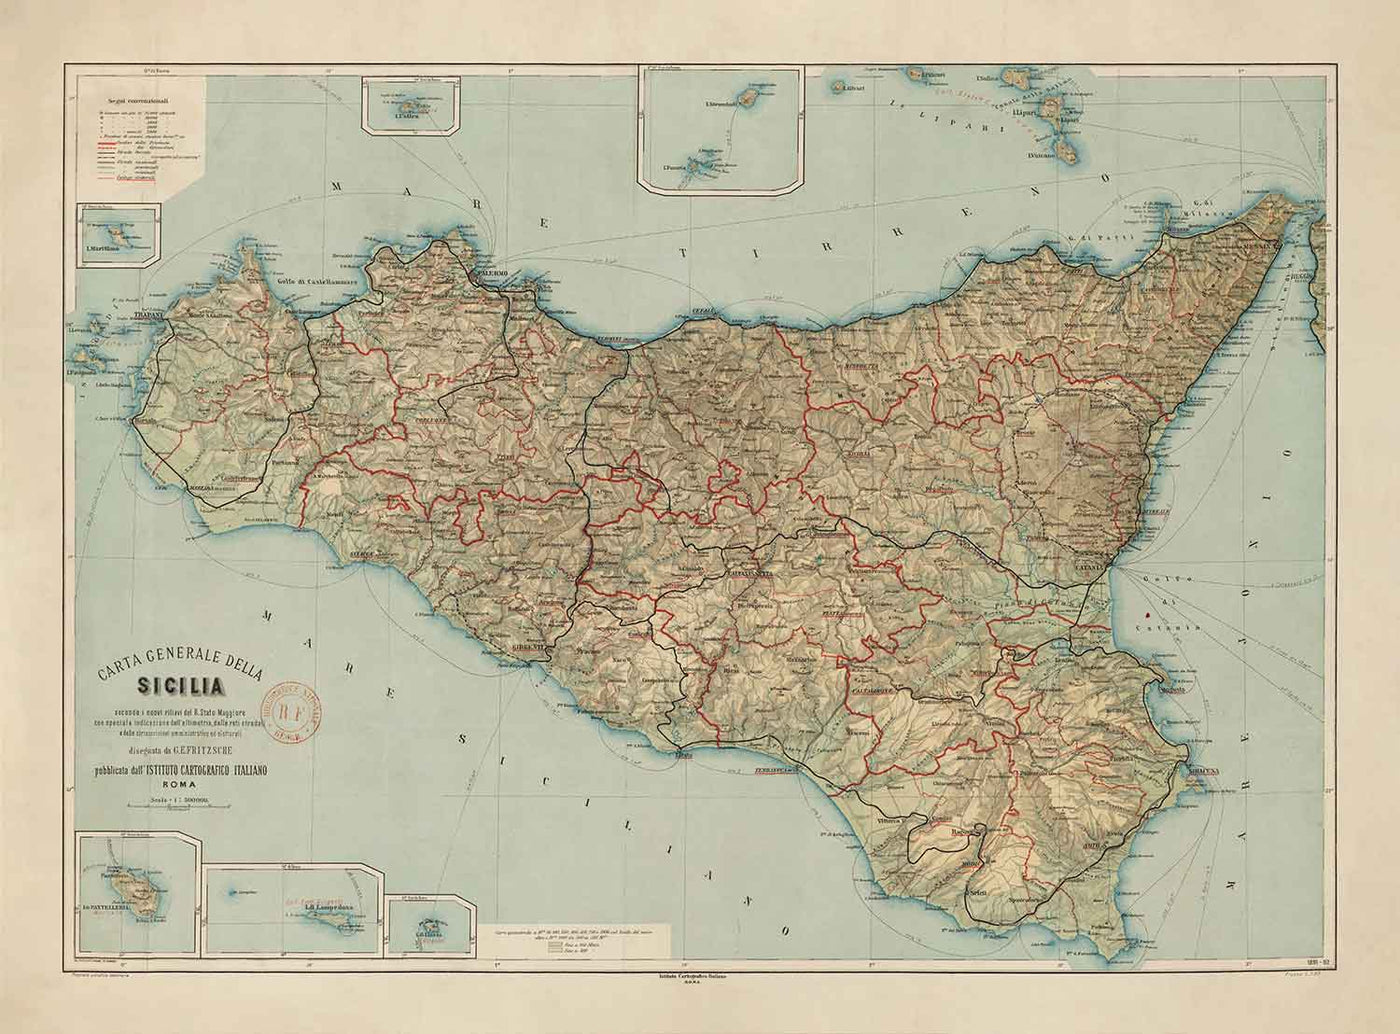 Old Map of Sicily in 1891 by Wilhelm Fritzsche - Palermo, Catania, Messina, Marsala, Sciacca